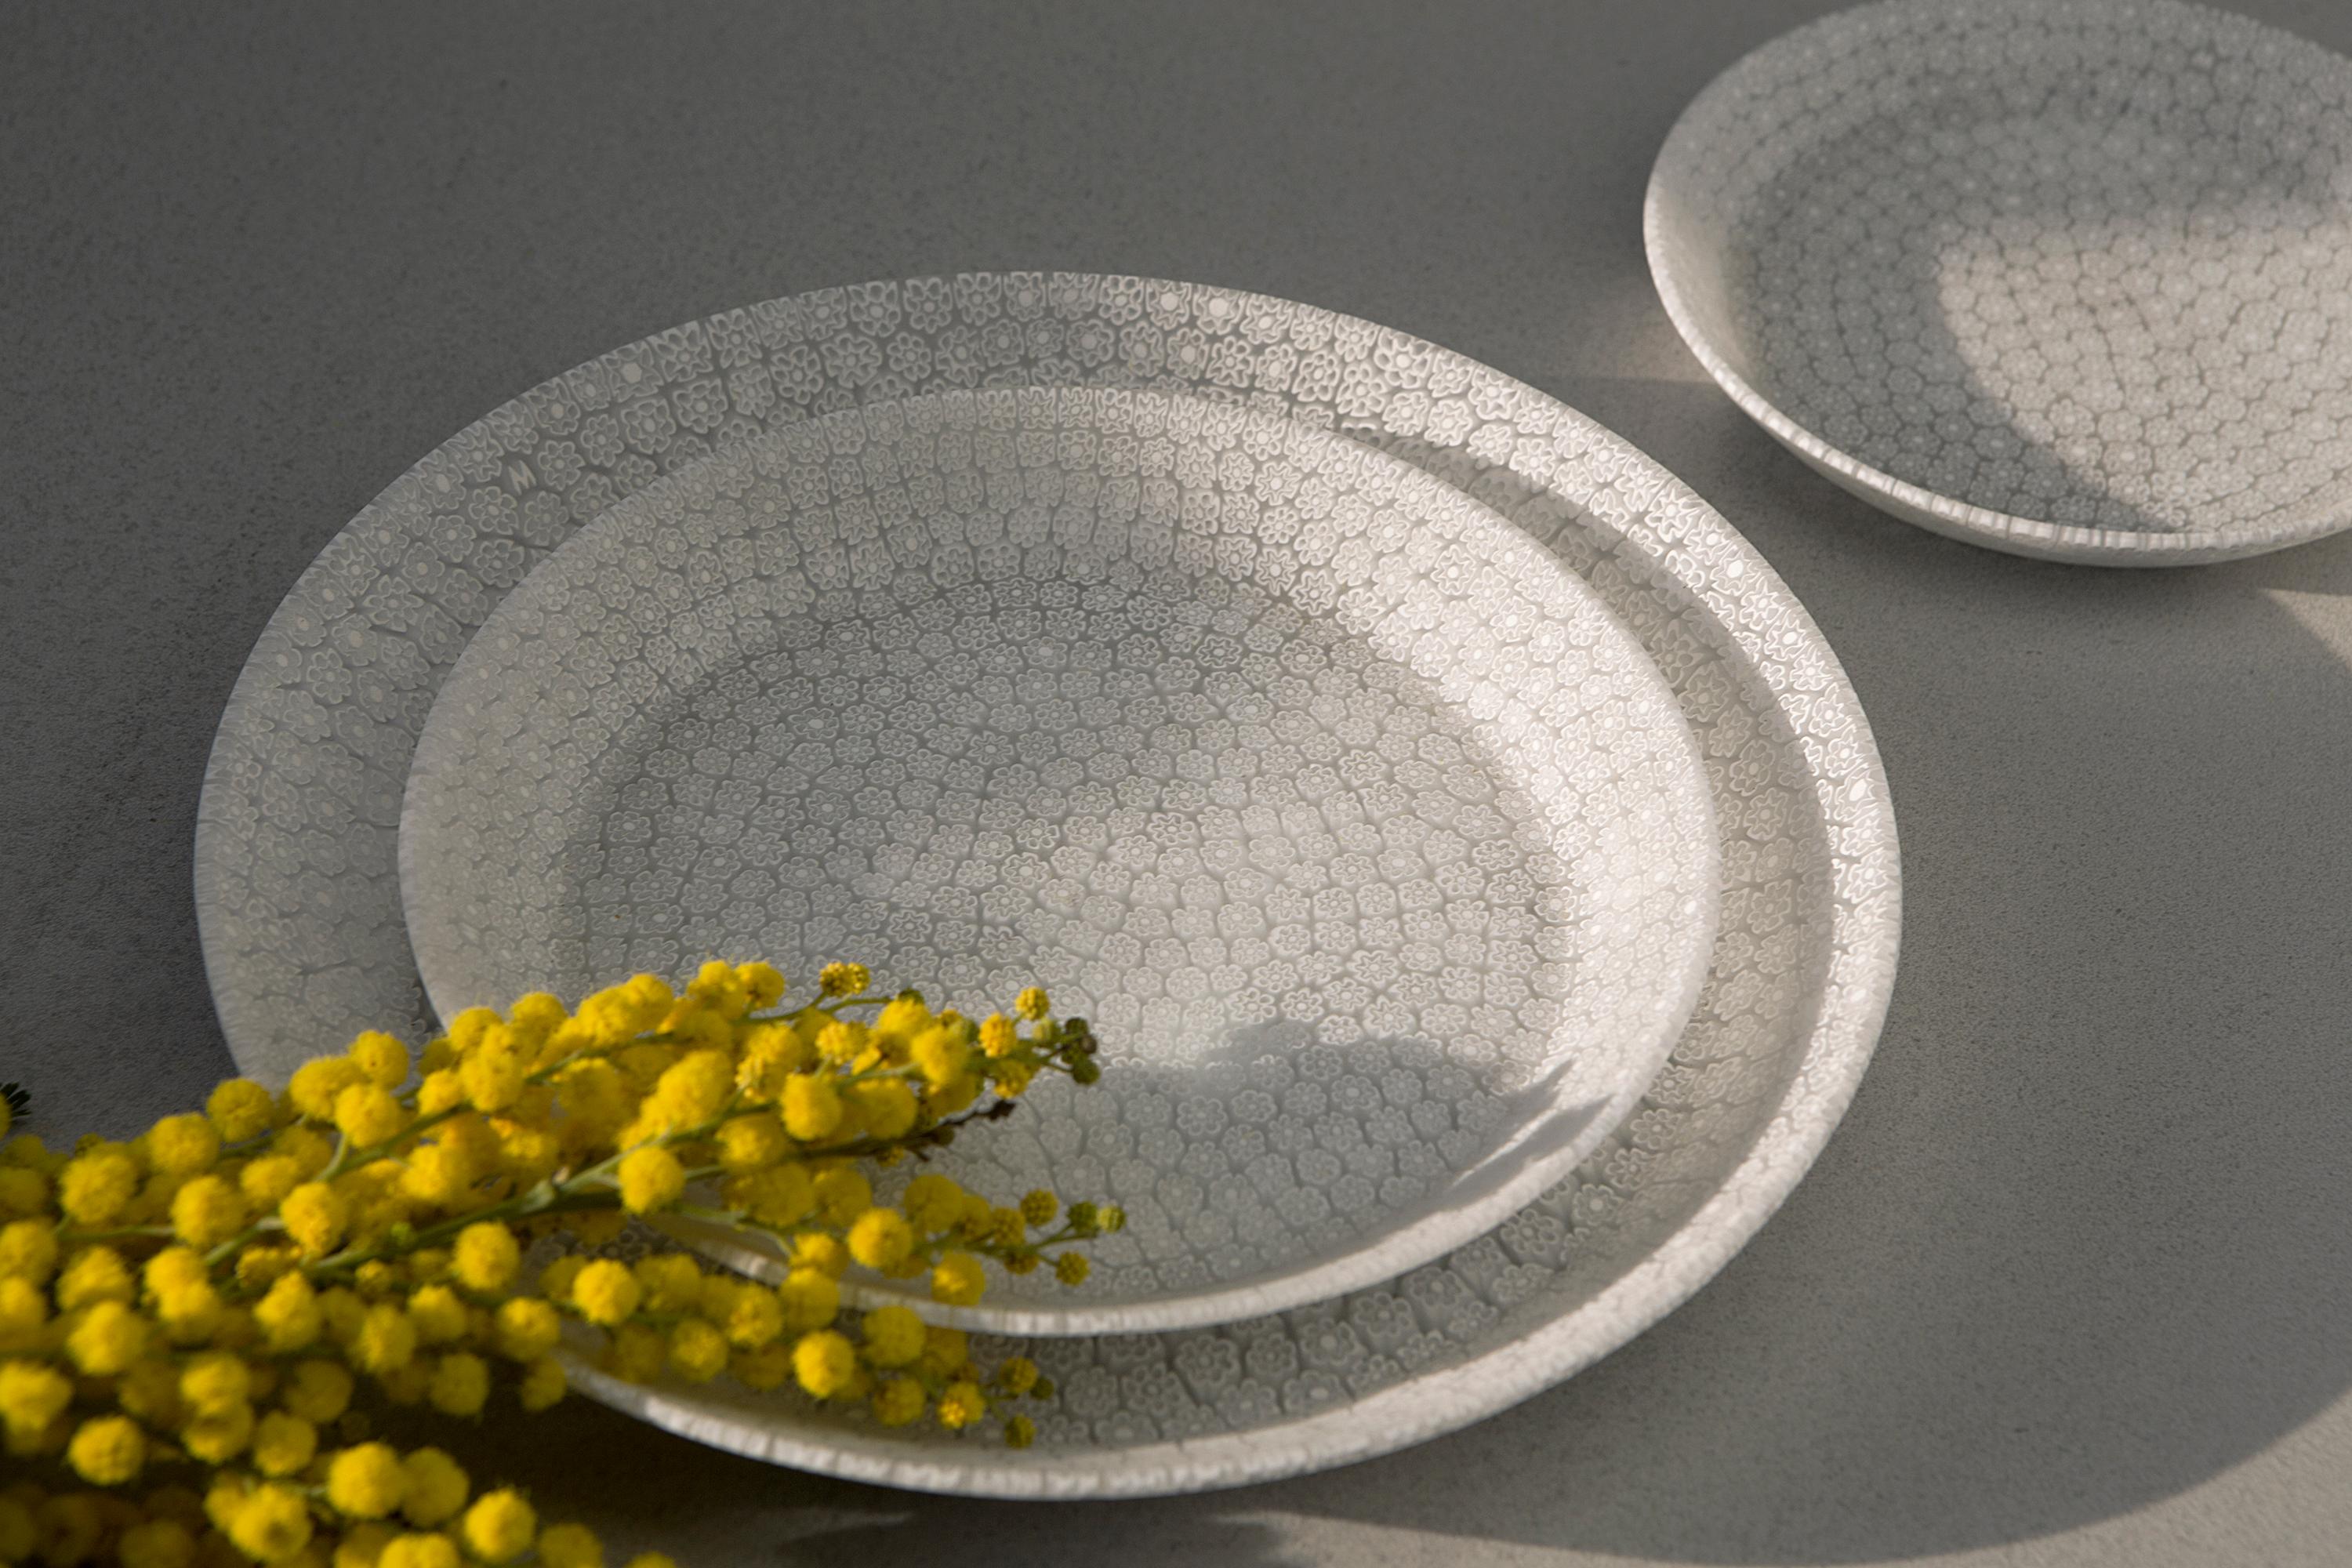 Designed by the Italo-Japanese couple Shiina+Nardi design, this plate is manufactured in Murano (Venice) by Ercole Moretti for Hands on design, one of the last artisan dealing with this rare technique. Bouquet is the expression of a modern shape for